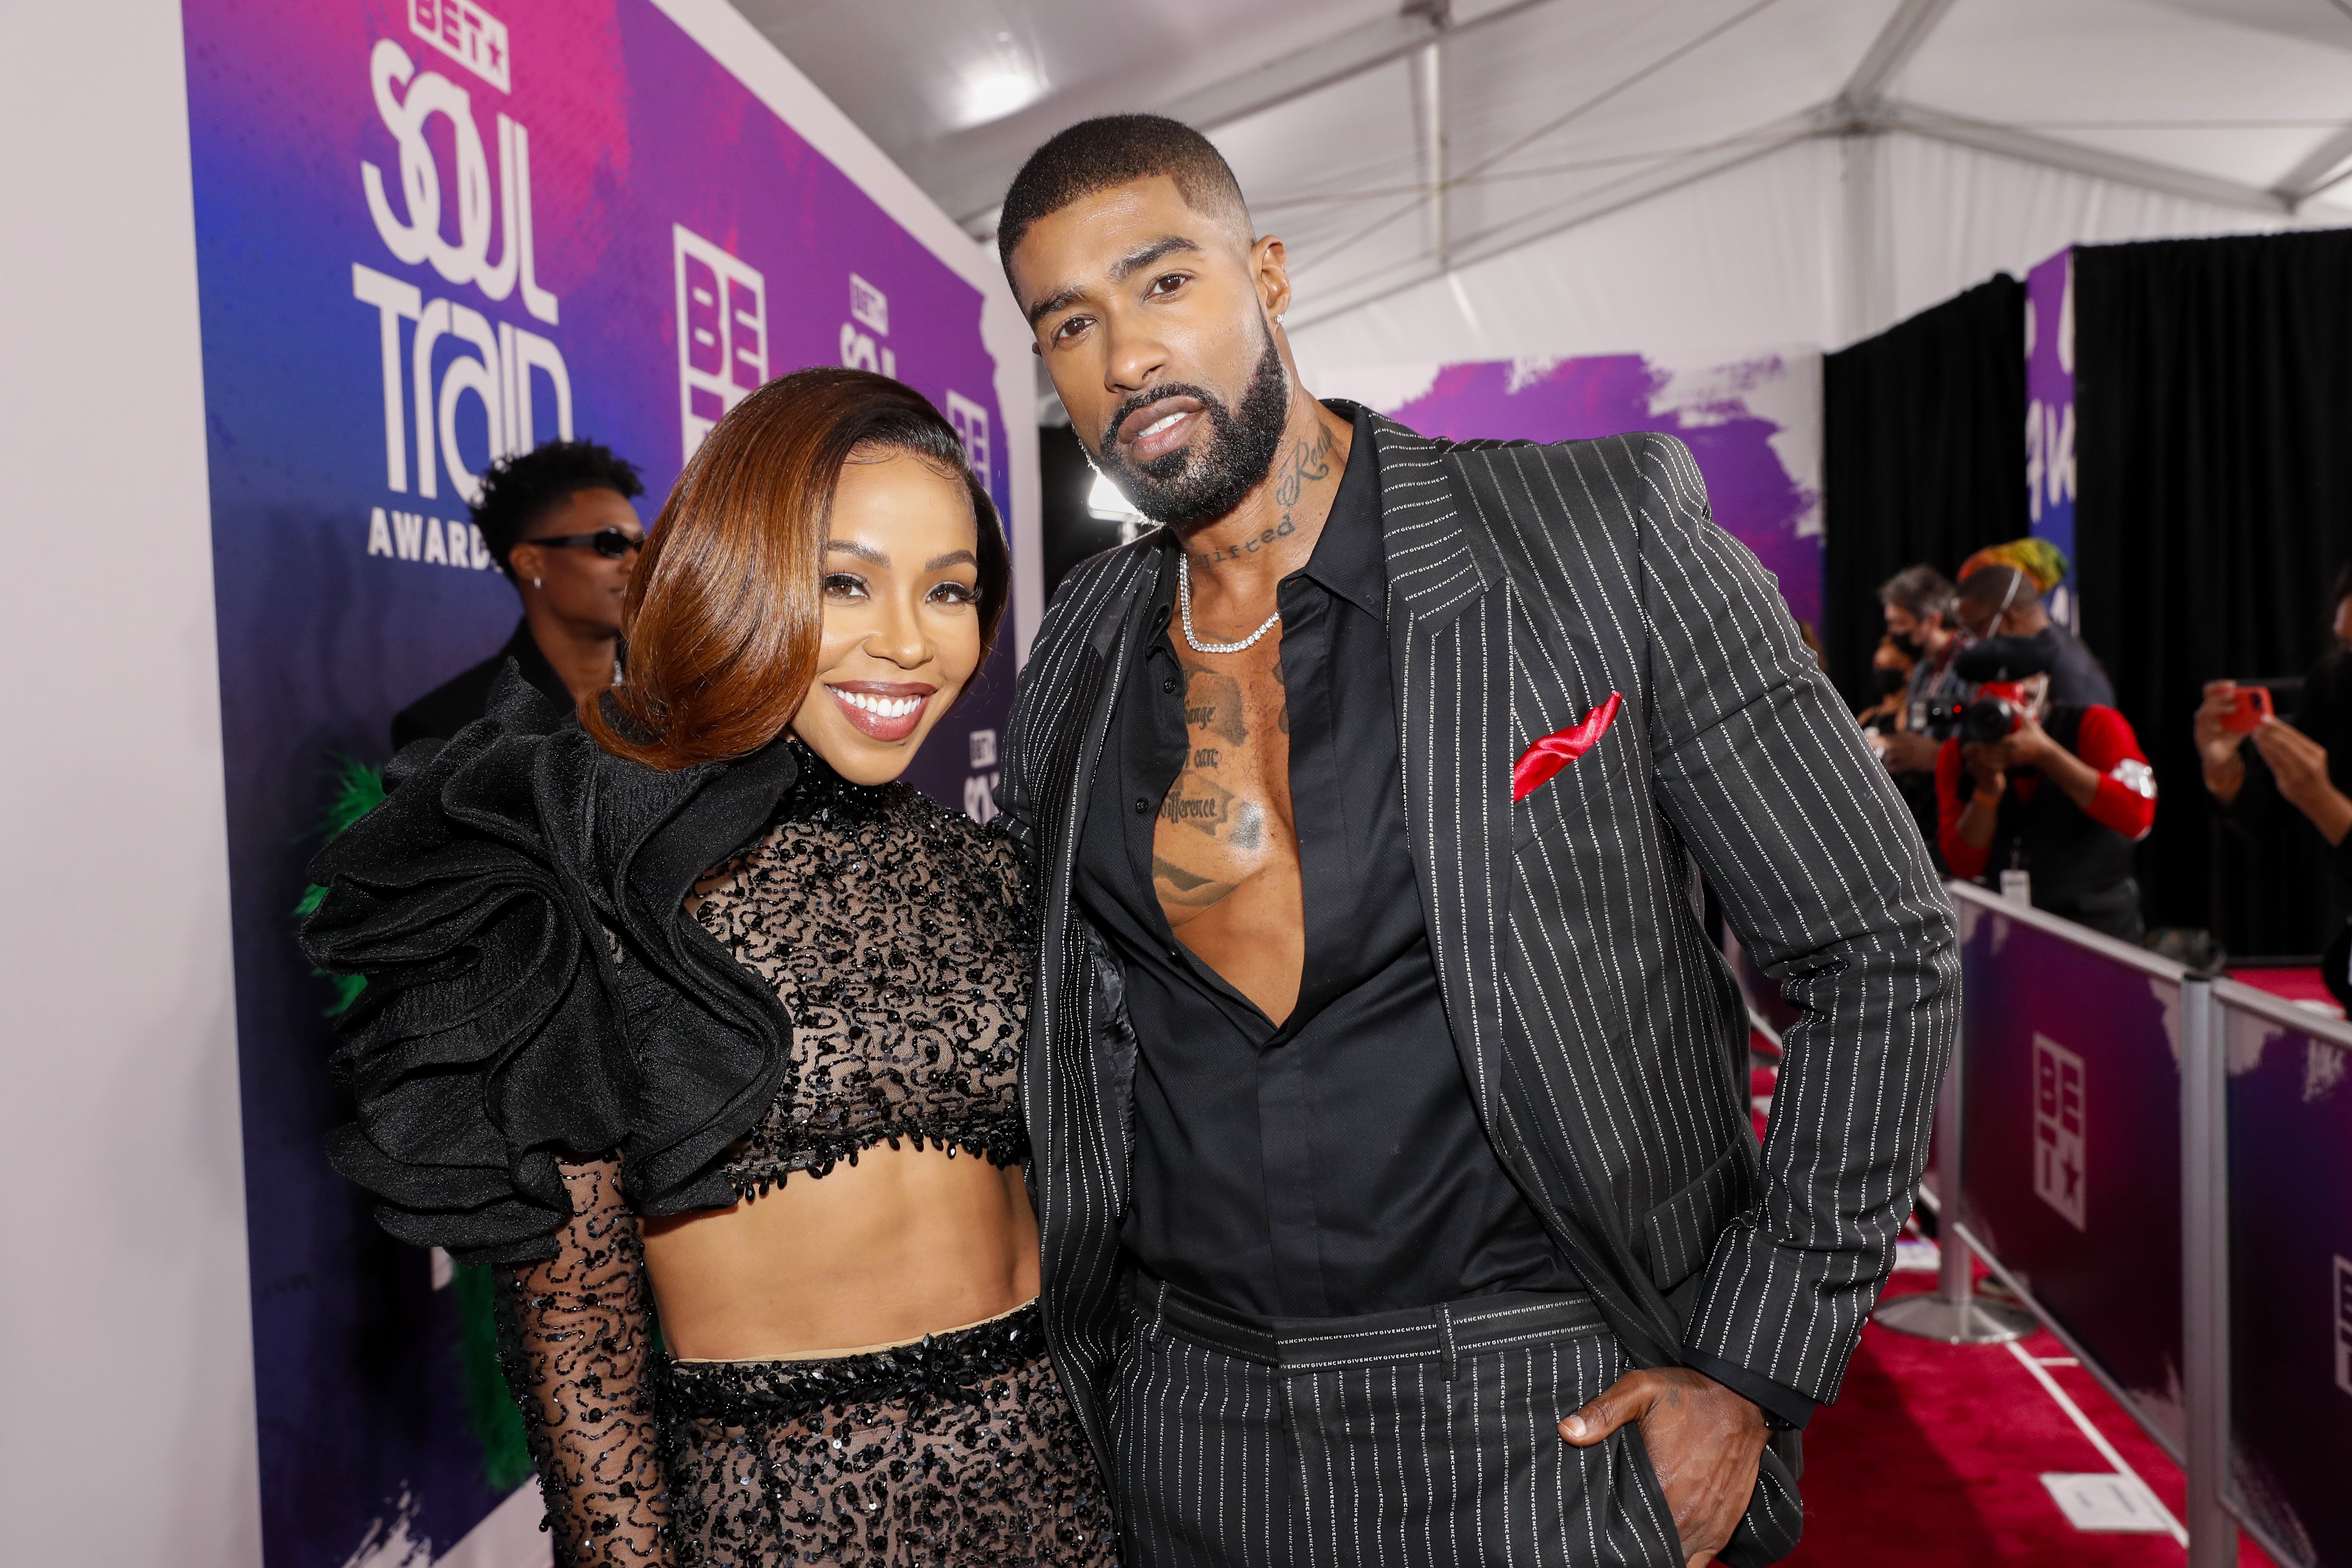 KJ Smith and Skyh Alvester Black attend The “2021 Soul Train Awards” Presented By BET at The Apollo Theater on November 20, 2021 in New York City. | Source: Getty Images